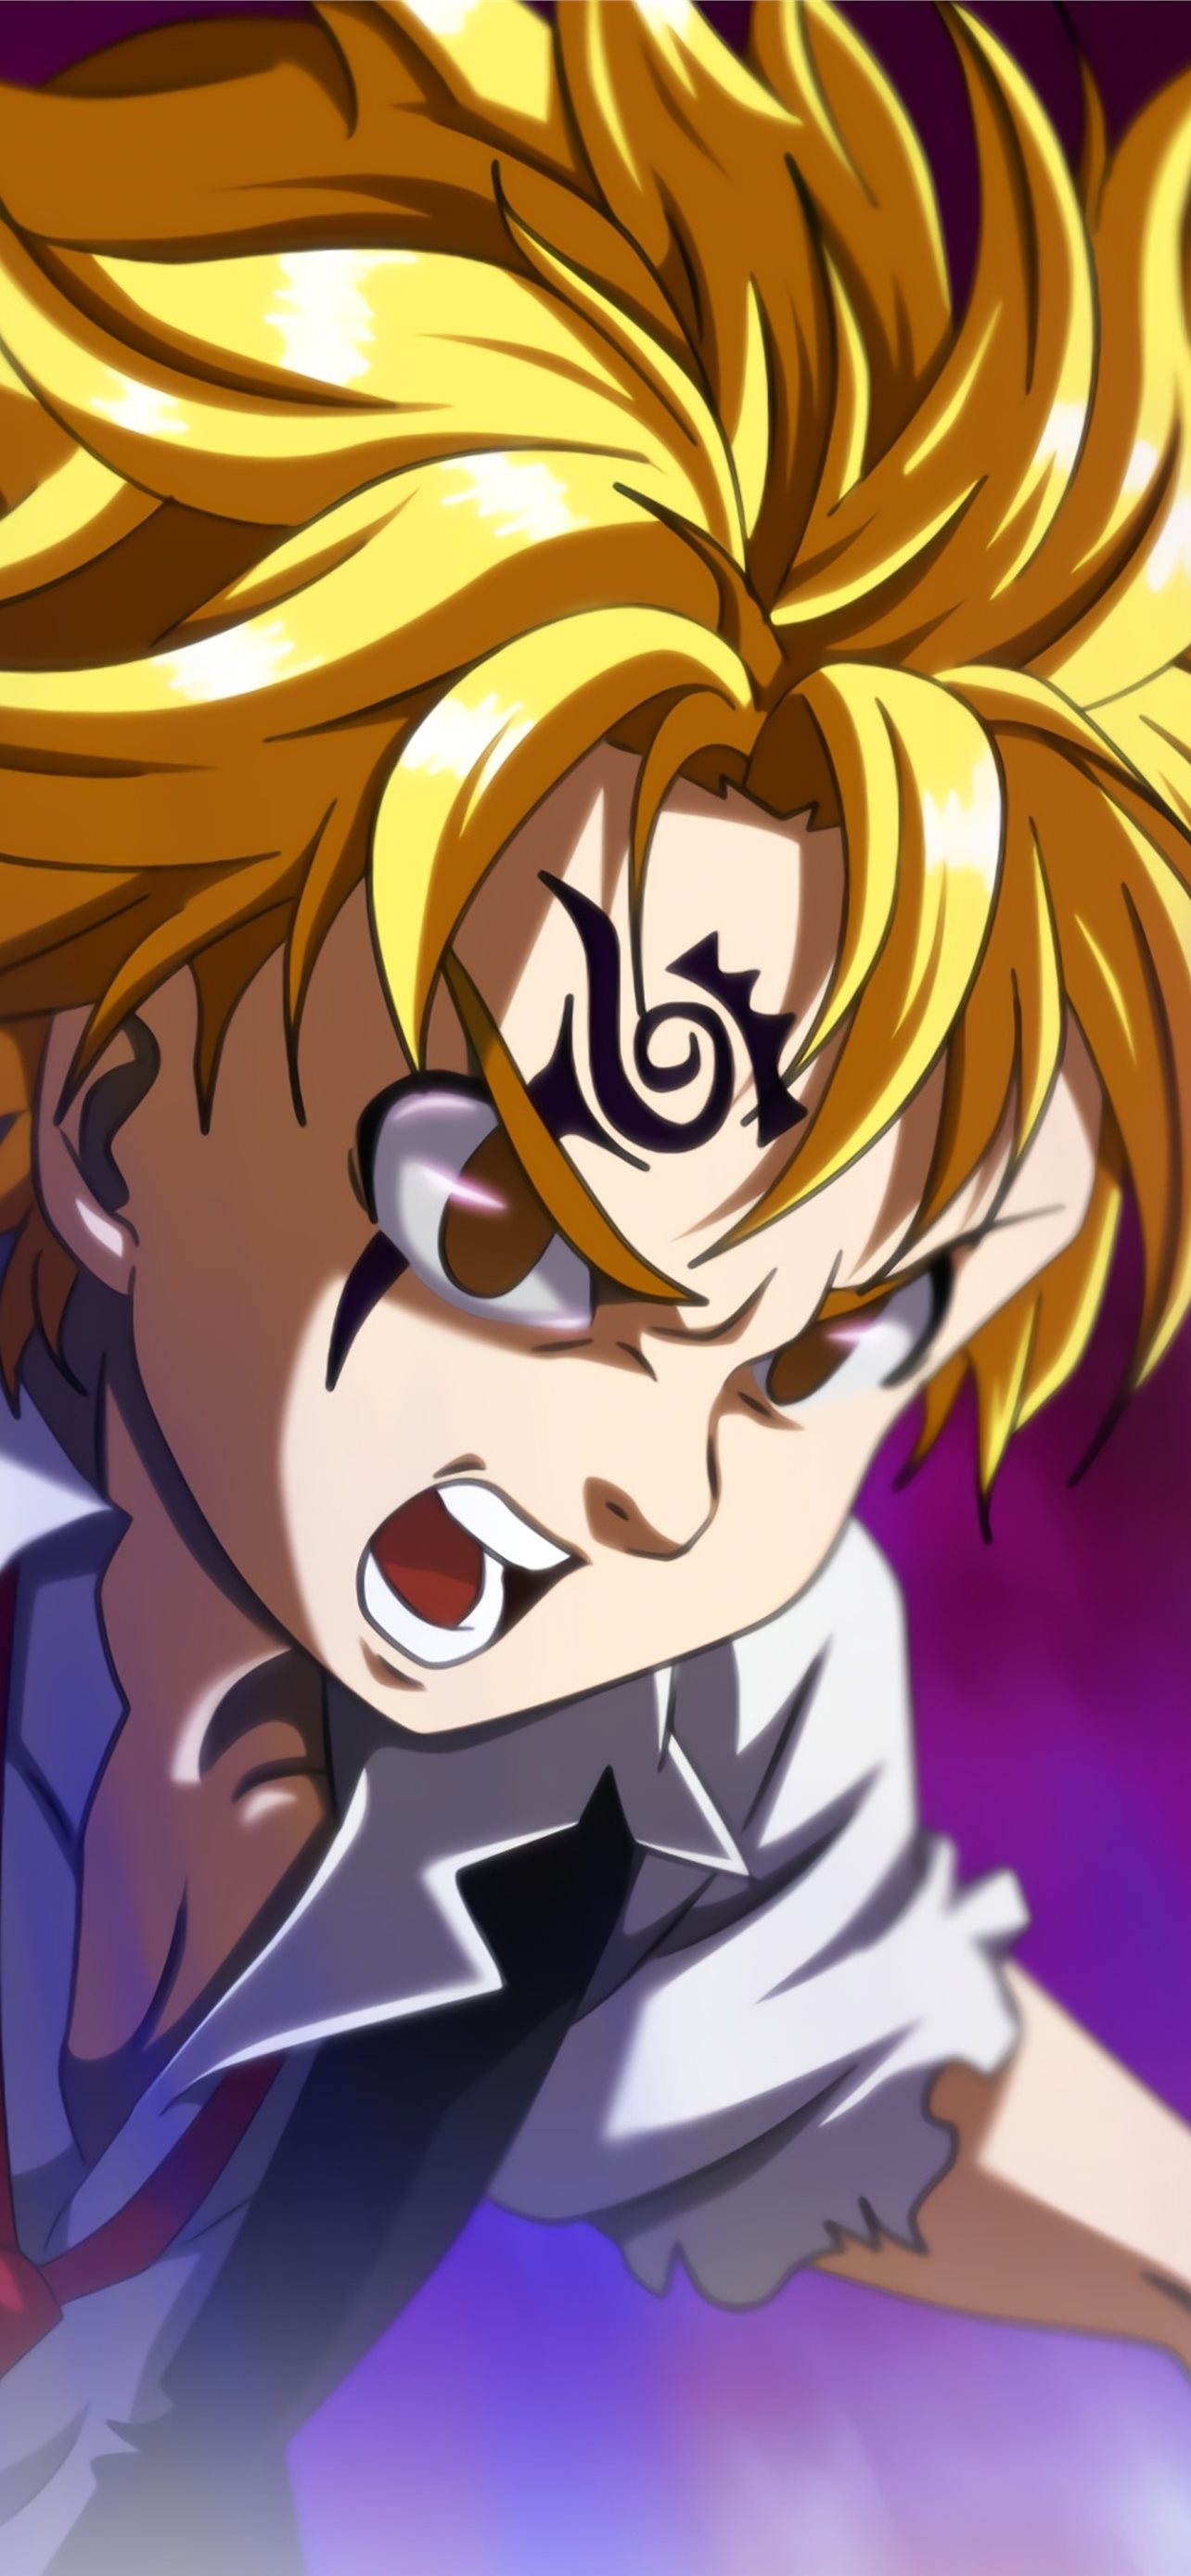 Meliodas the seven deadly sins k sony xperia x xz iphone wallpapers free download